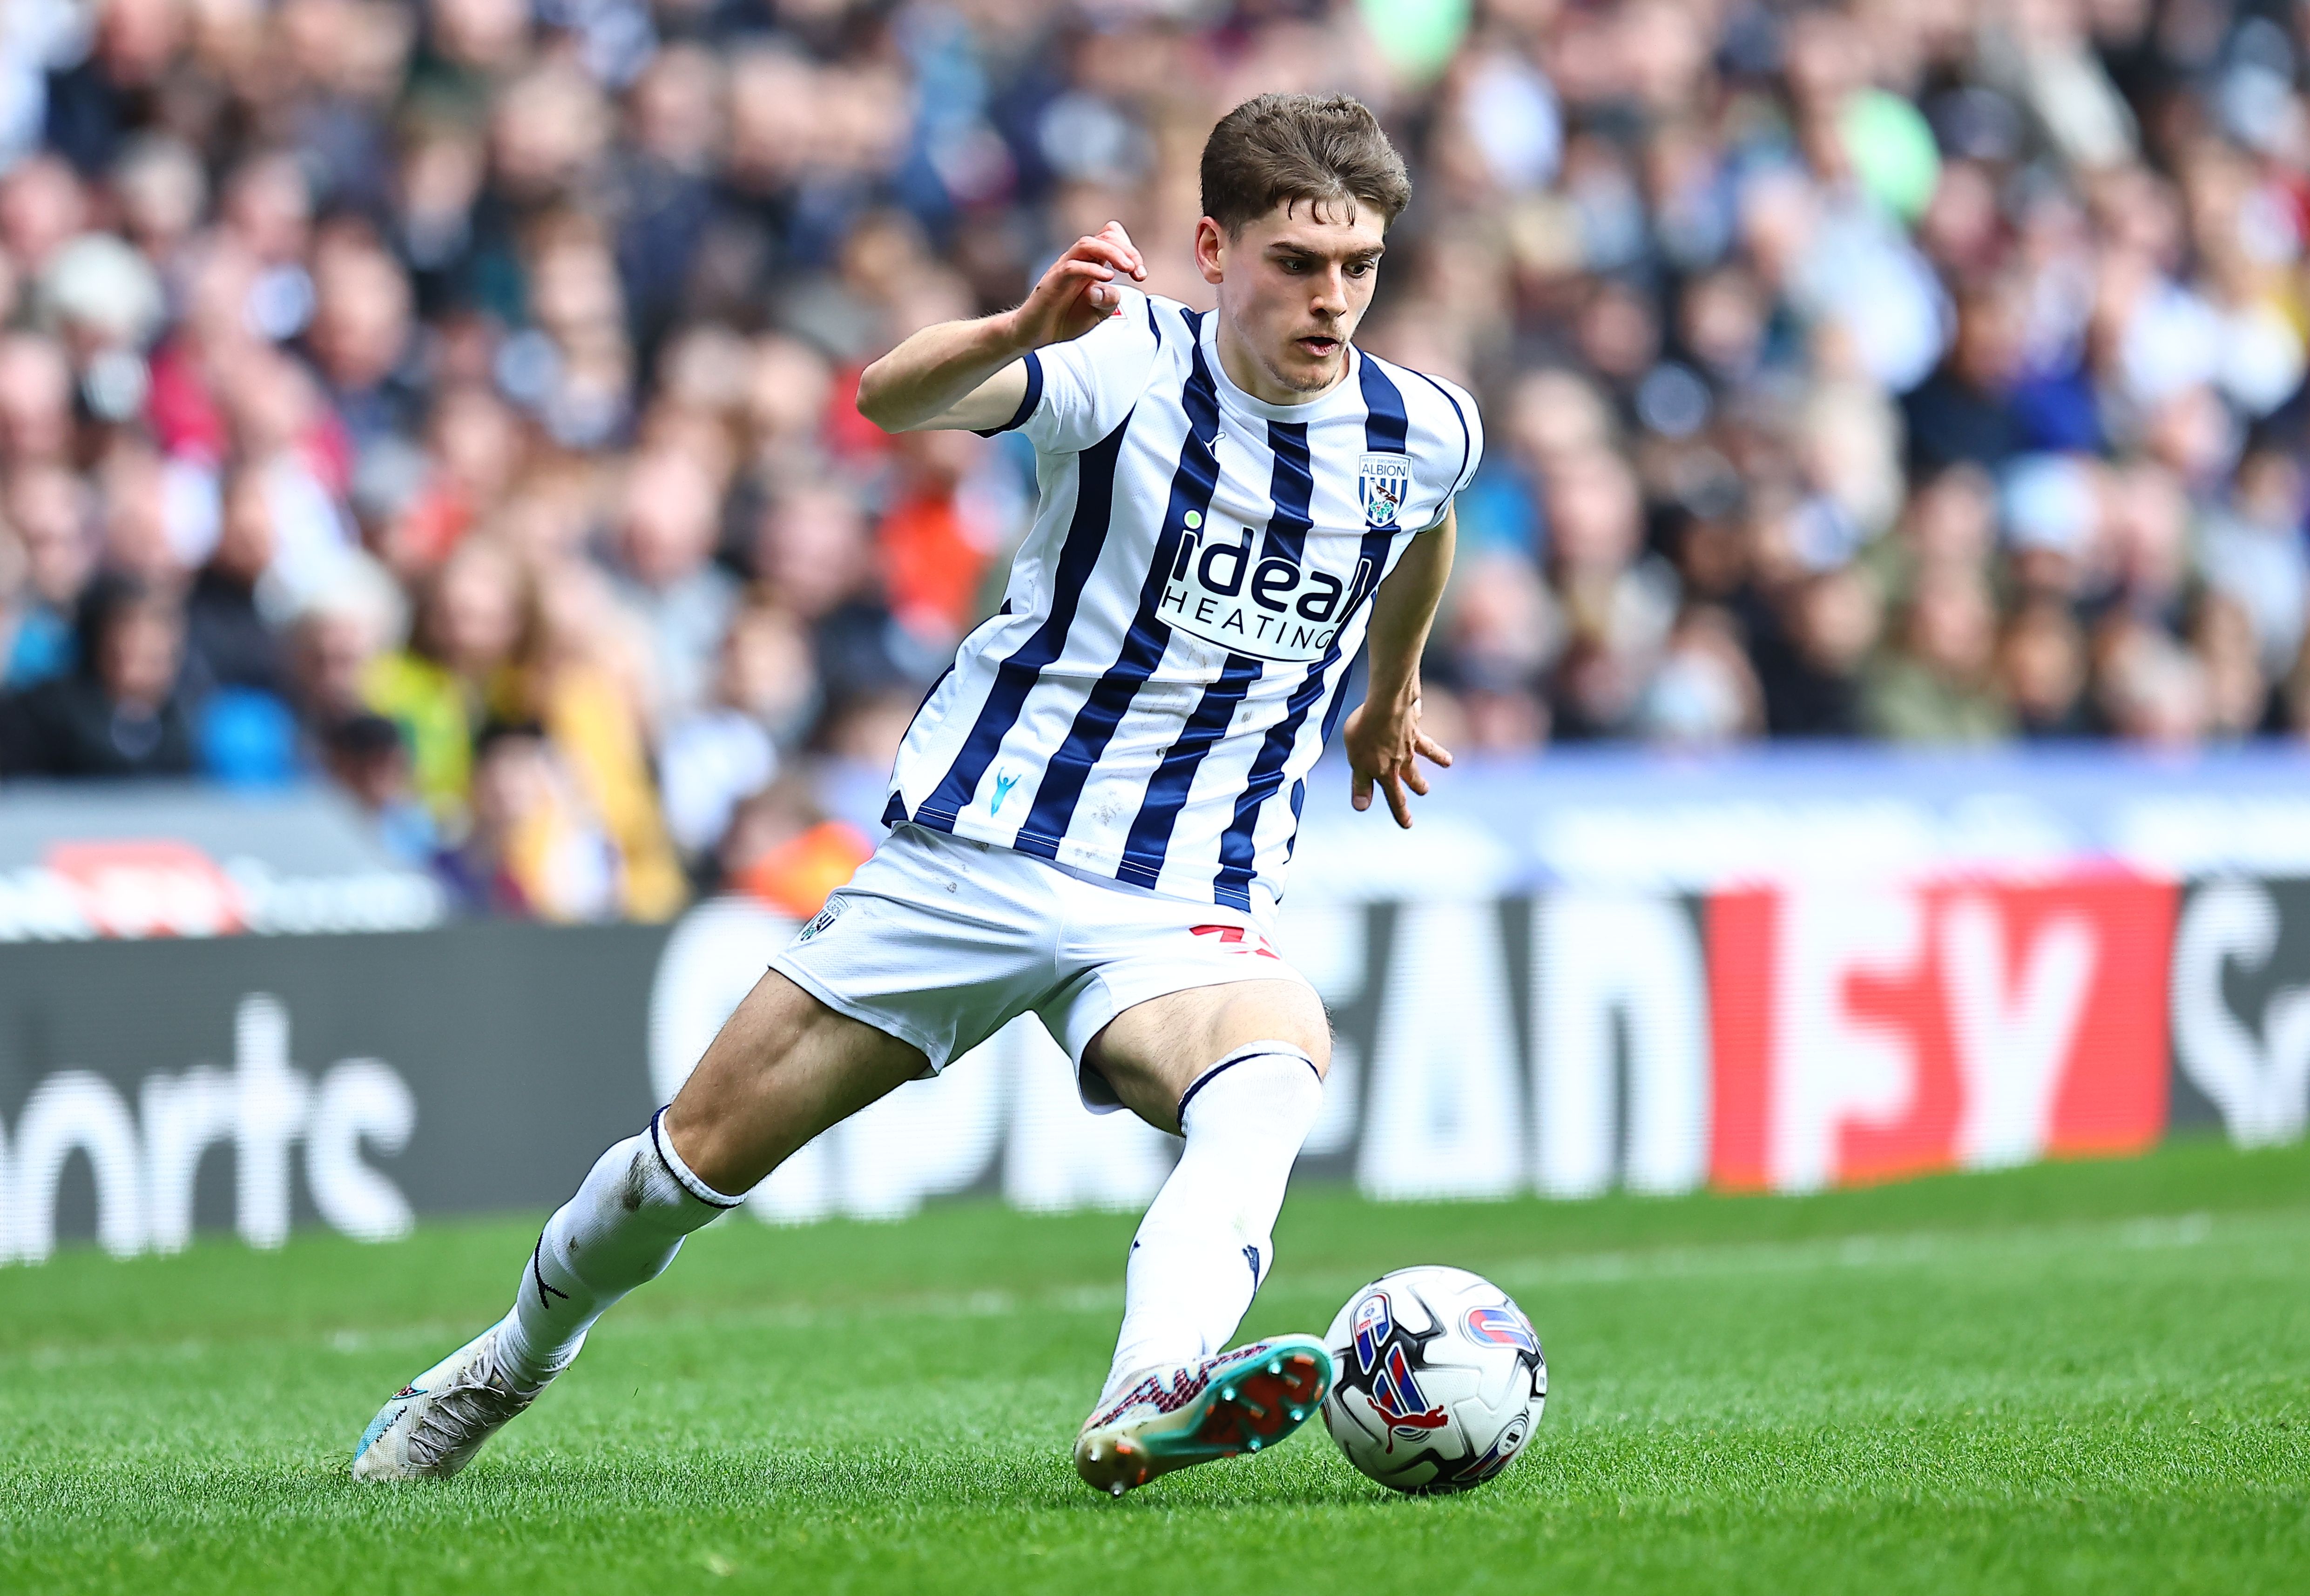 Tom Fellows running with the ball for Albion wearing the home kit 